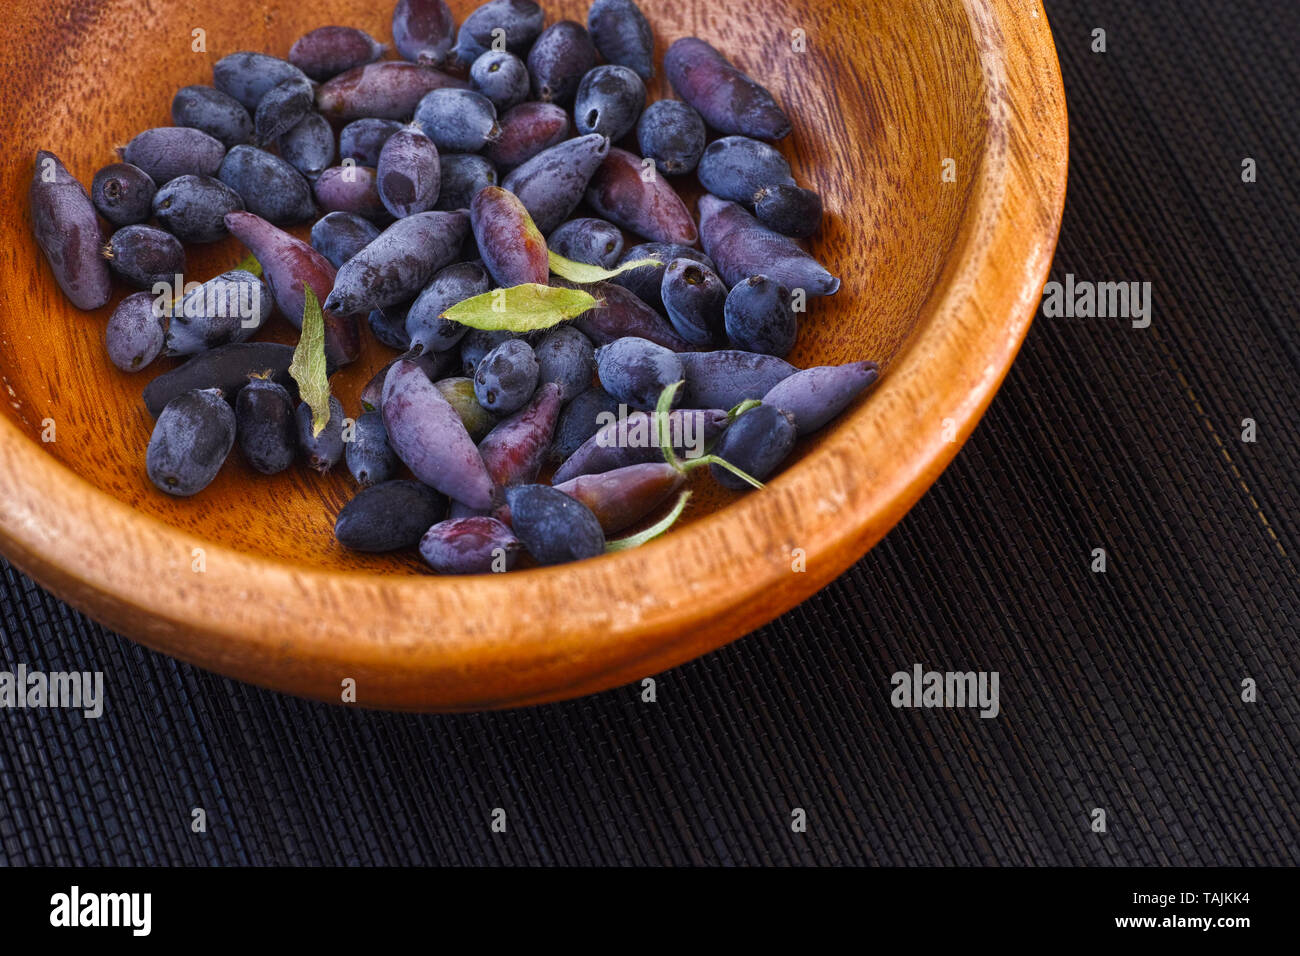 Blue fly honeysuckle berries in a wooden bowl. Close up. Stock Photo